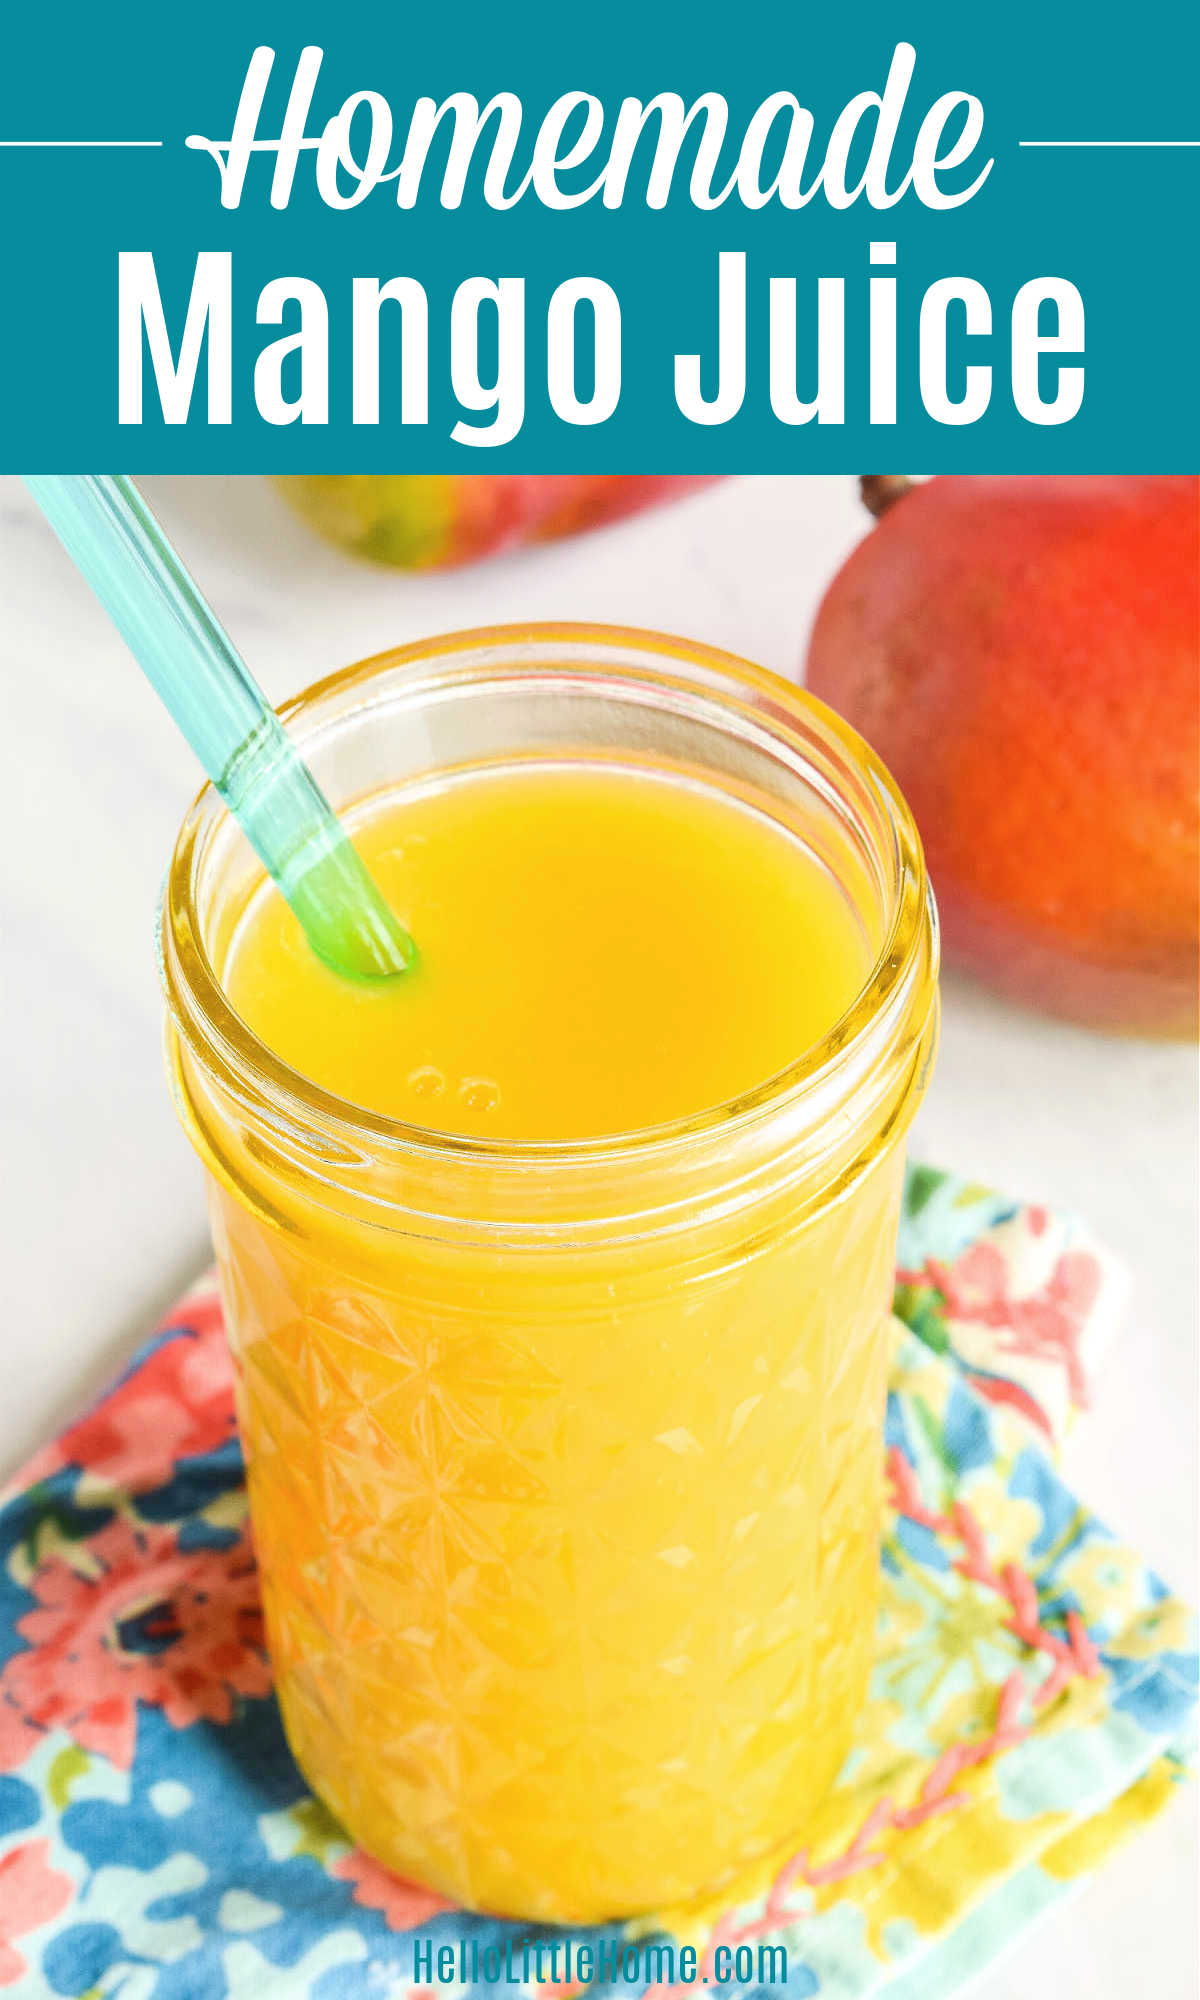 A cup of mango juice served with a straw on a colorful napkin.